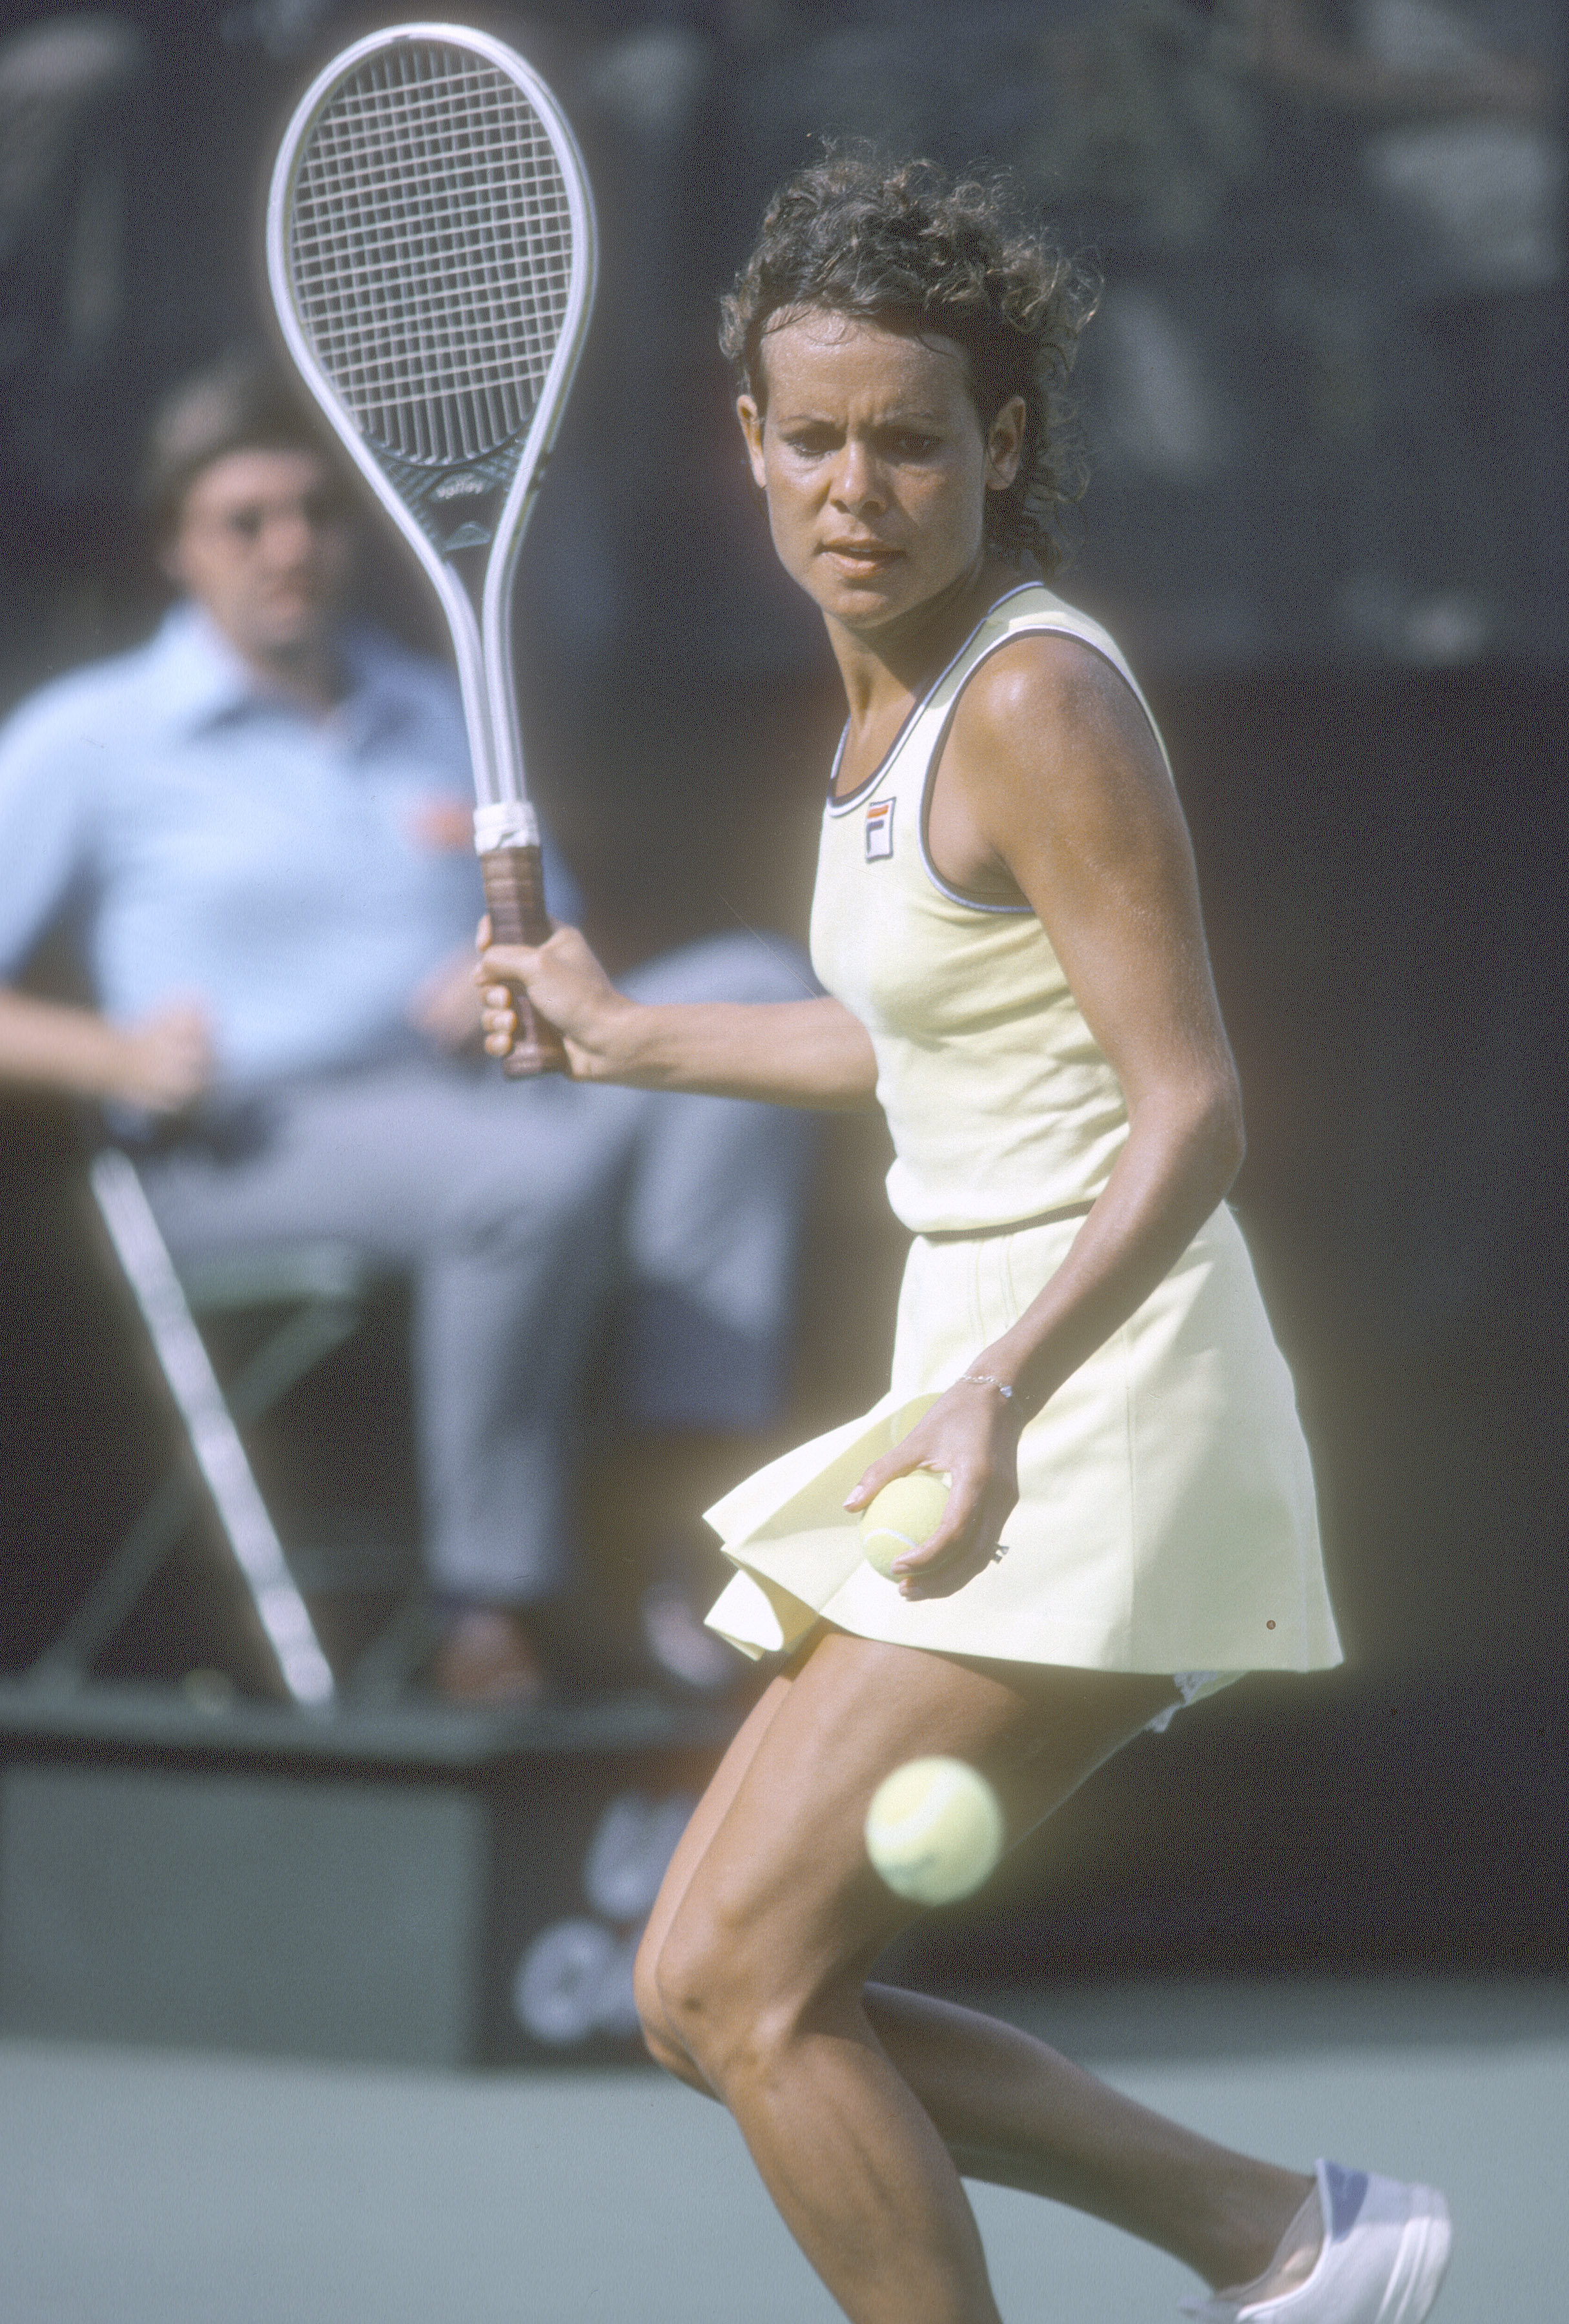 Evonne Goolagong at the 1979 US Open Tennis Championship in New York City | Source: Getty Images